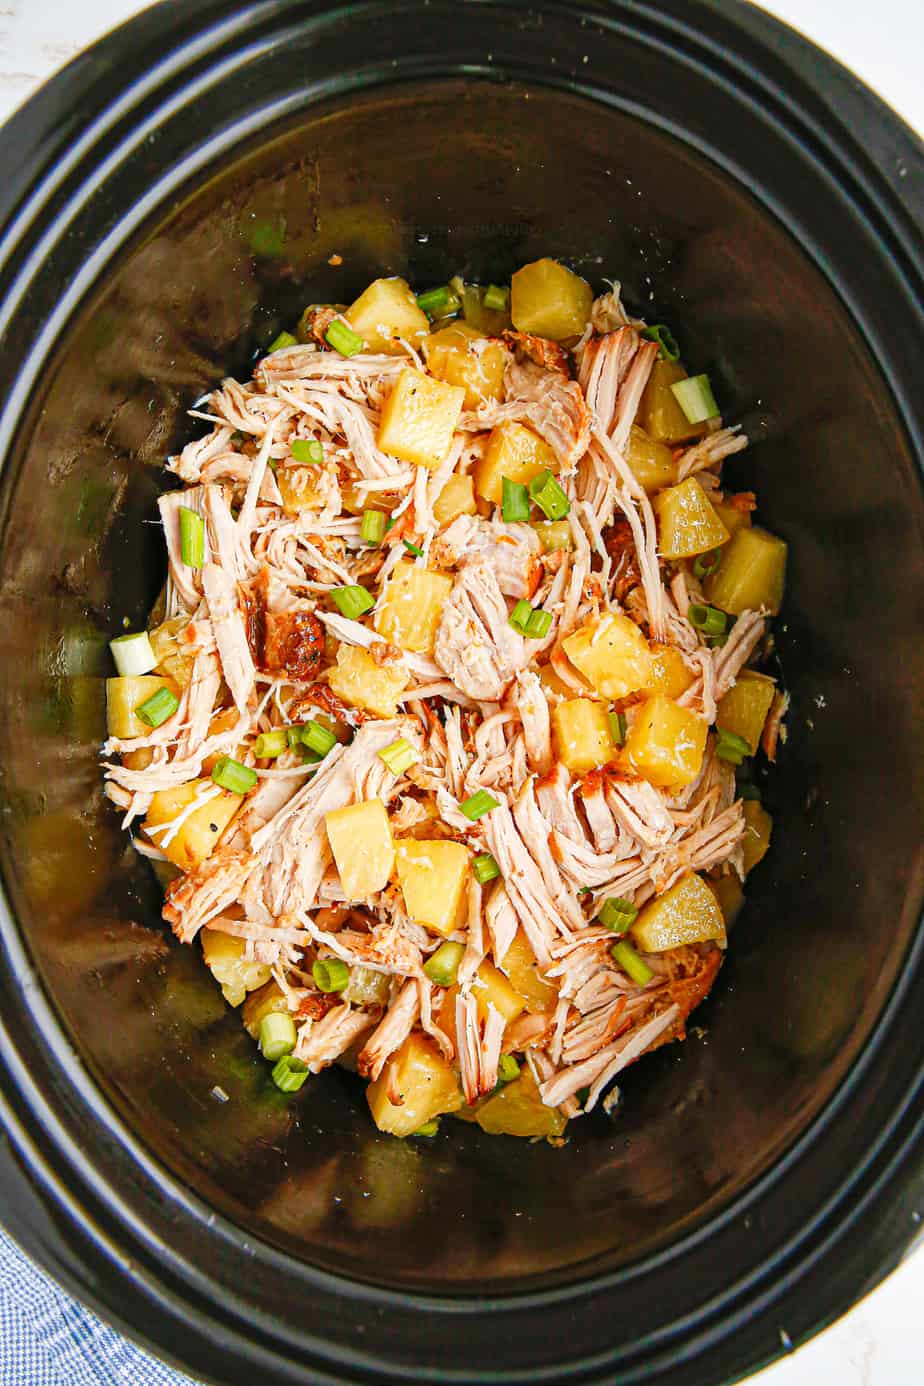 Shredded pork in slow cooker mixed with pineapple pieces